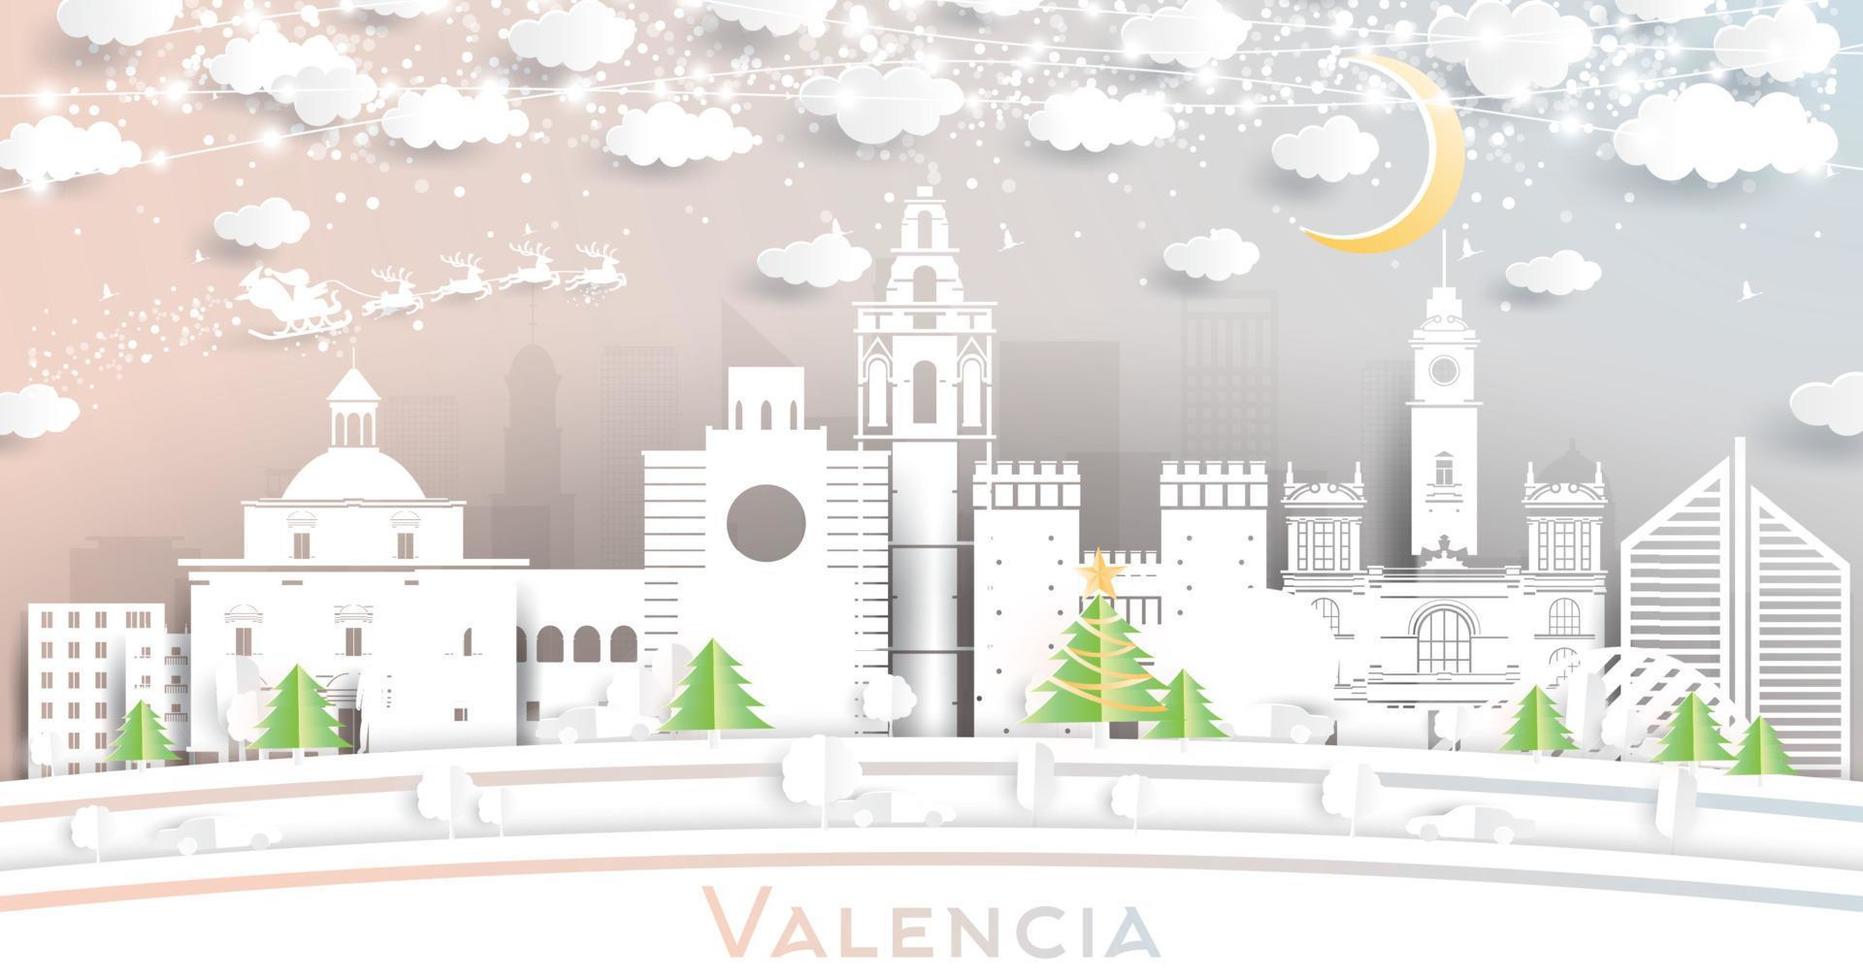 Valencia Spain City Skyline in Paper Cut Style with Snowflakes, Moon and Neon Garland. vector